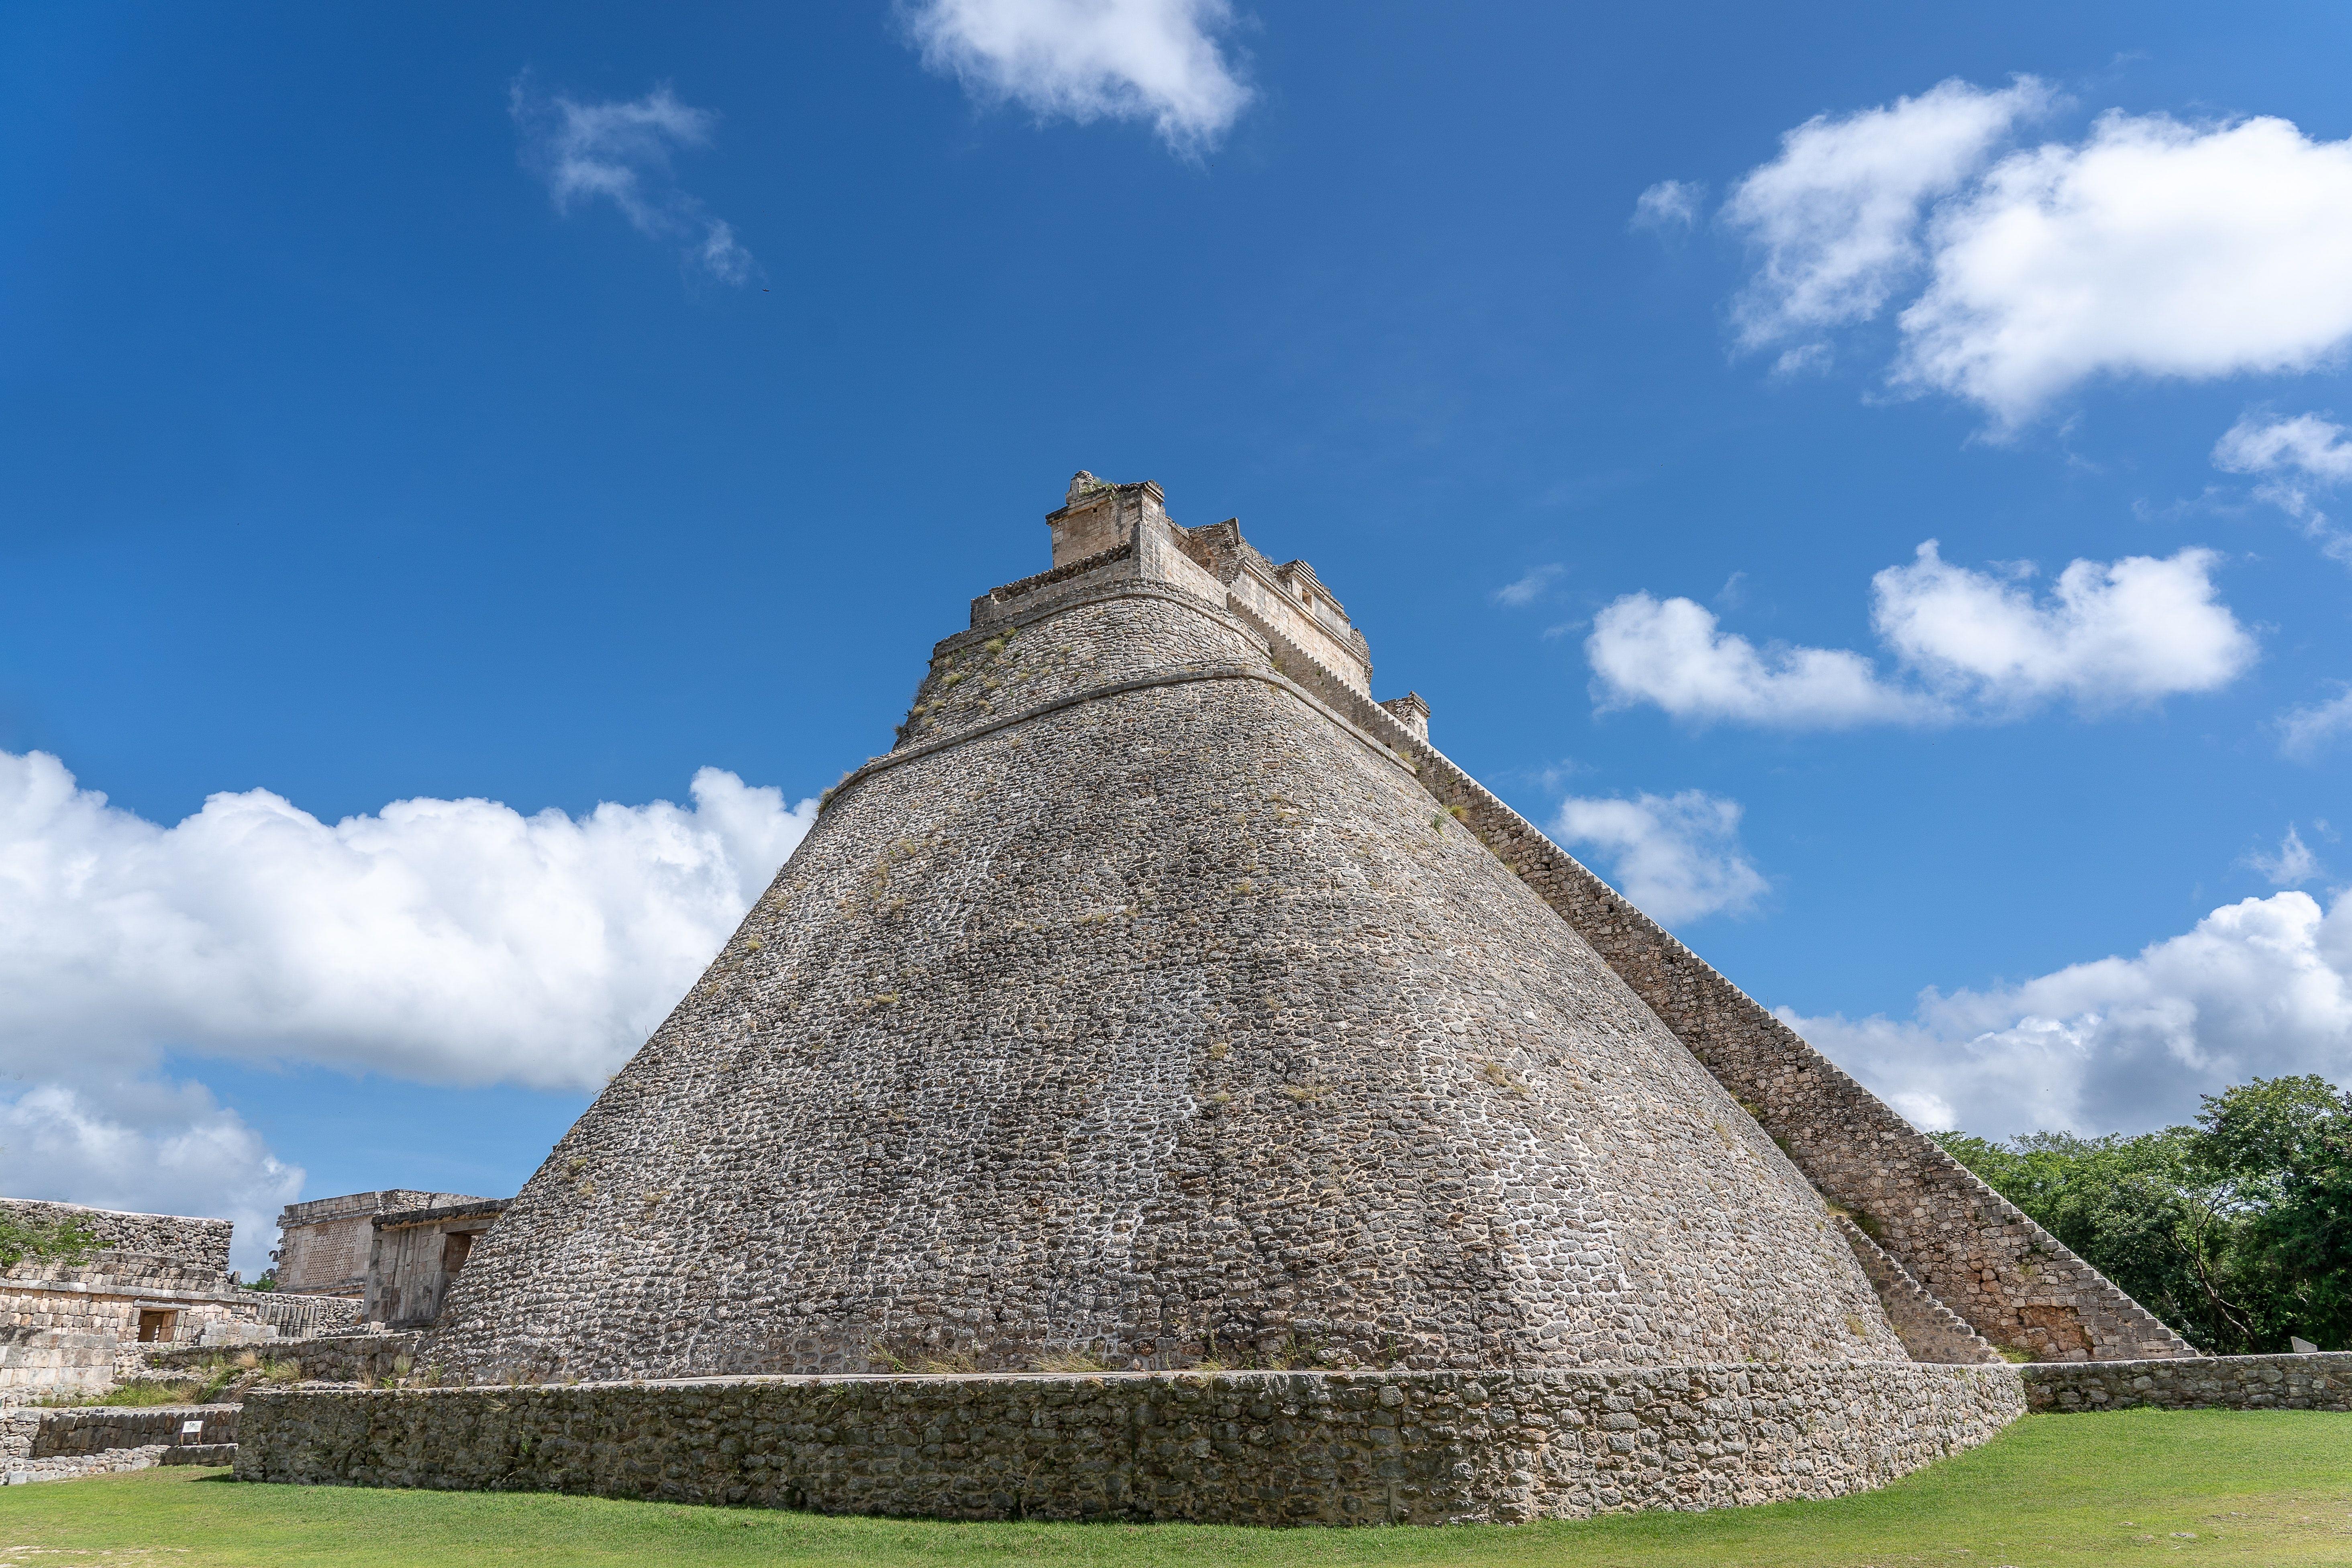 Uxmal Tours and Tickets